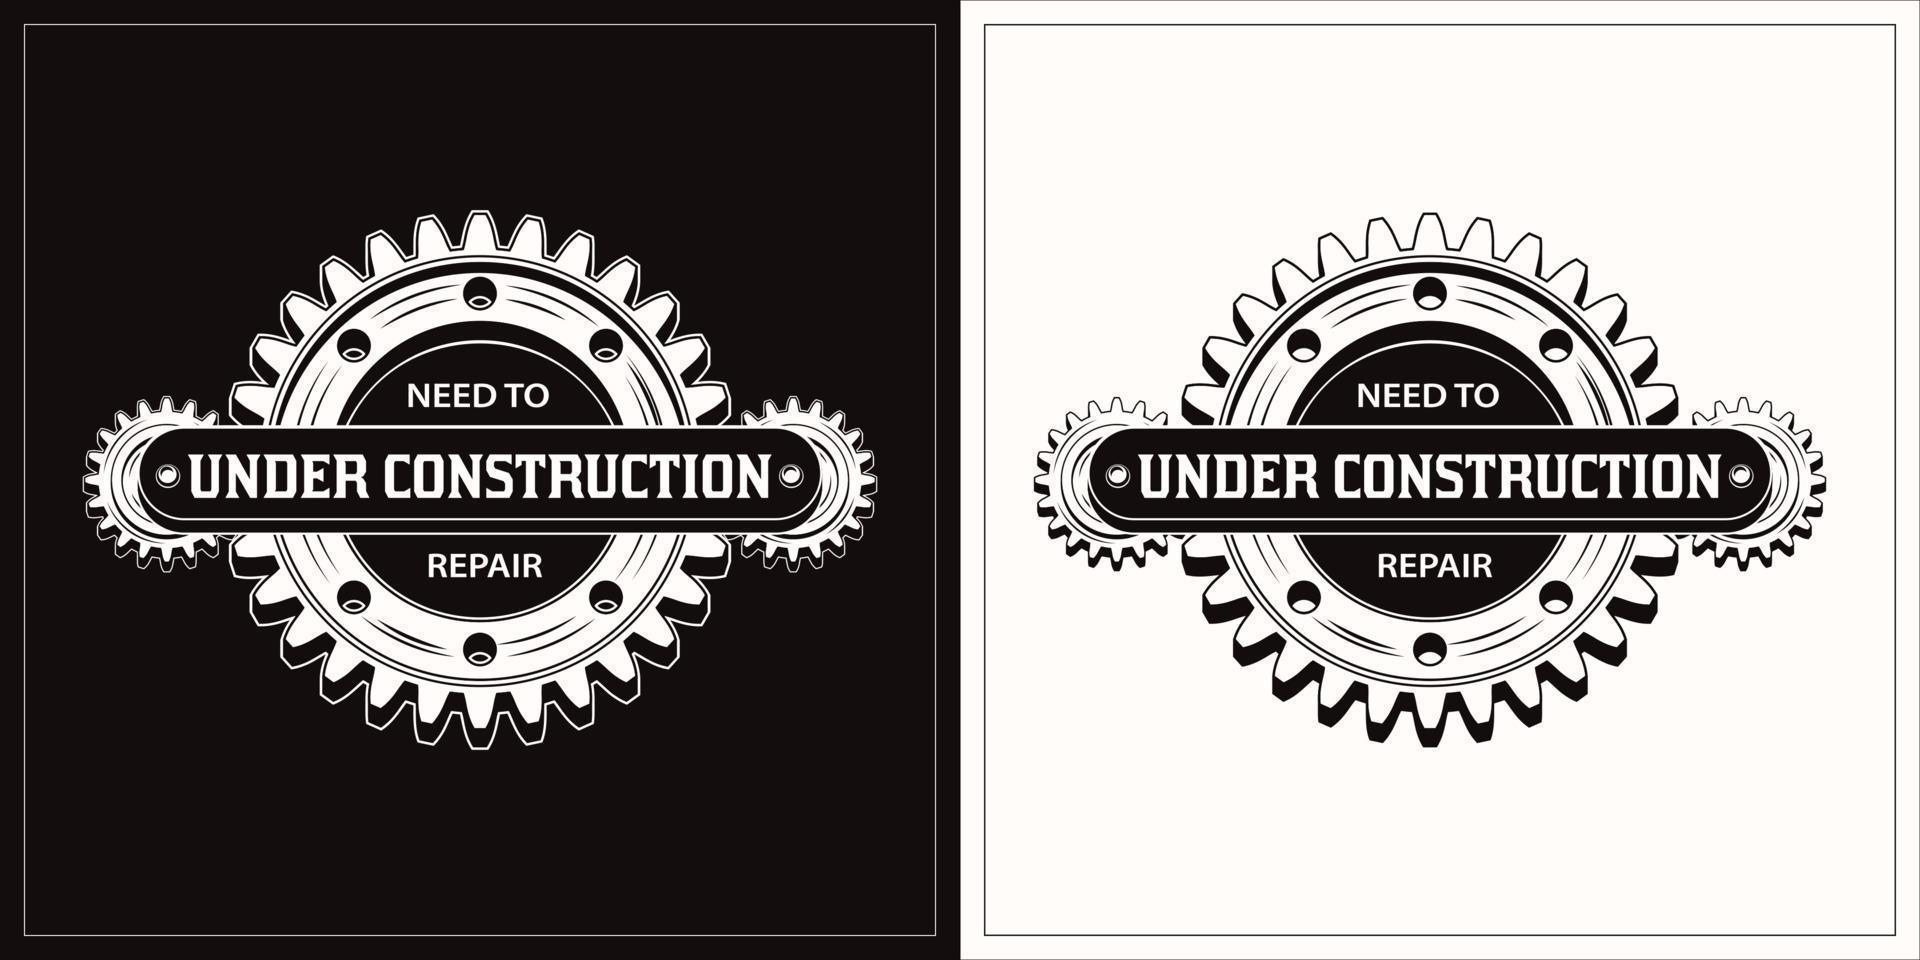 Vintage label with black ans white gears, rivets, horizontal space for text. Warning emblem Under construction and Need to repair. Round emblem in steampunk style. vector